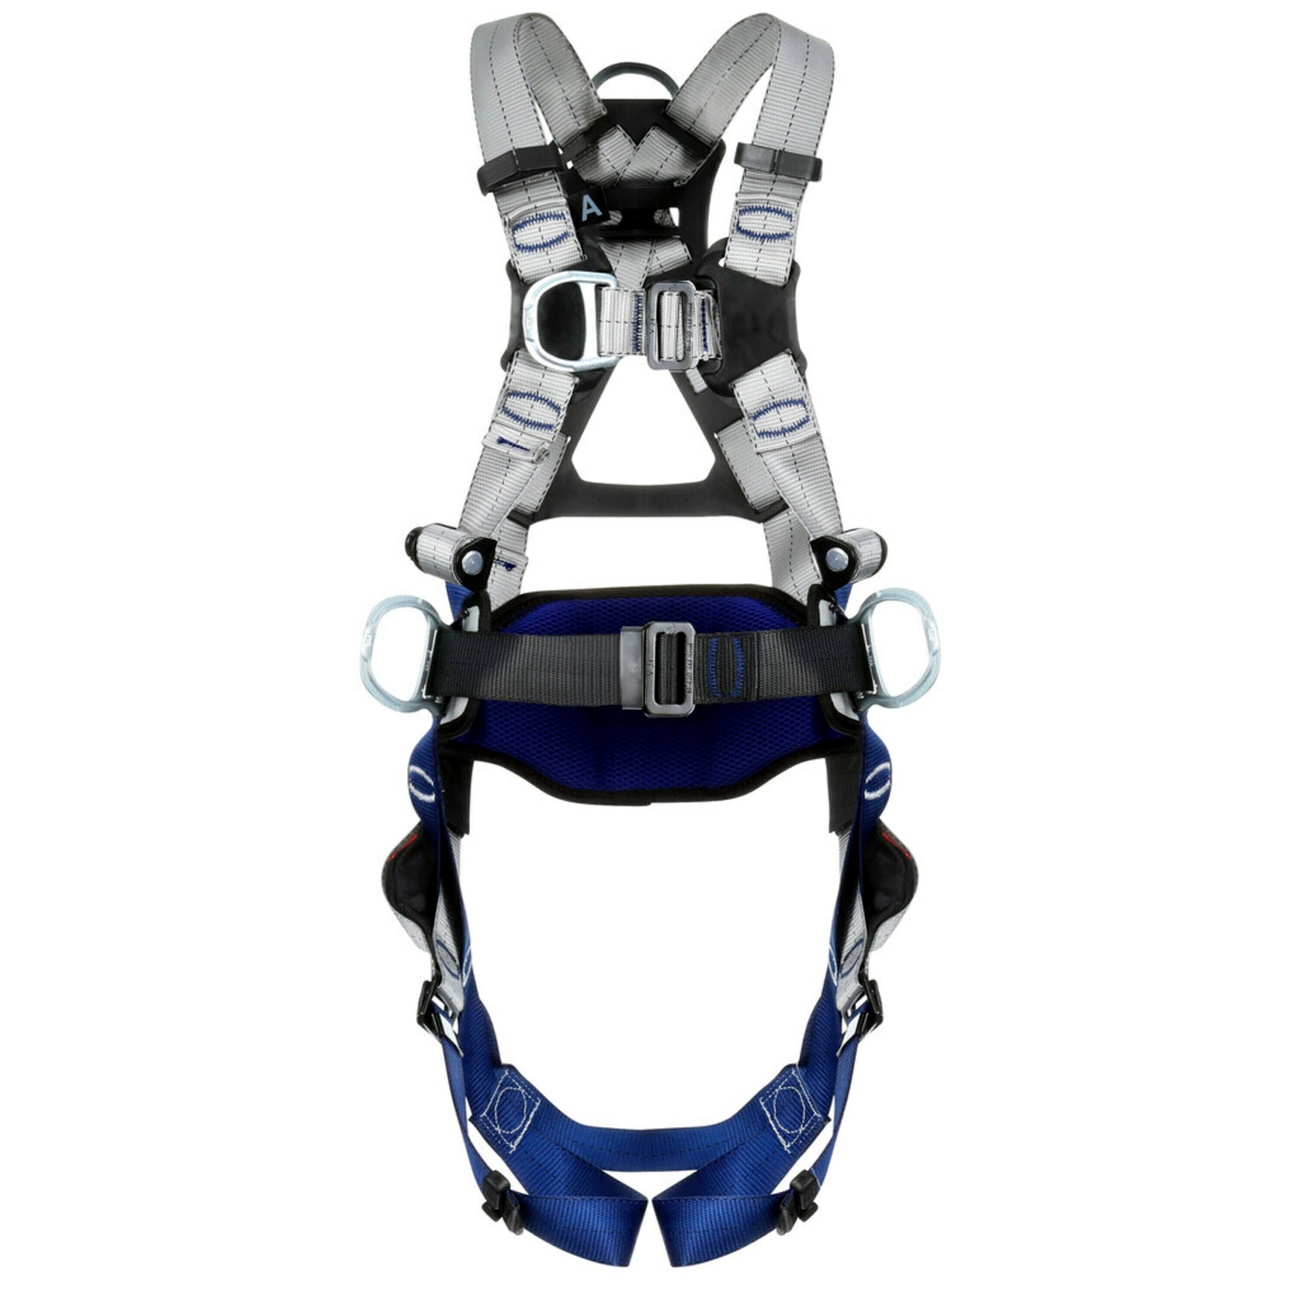 3M DBI-SALA ExoFit XE50 4-point harness with safety harness 1112714, automatic buckles, size 1